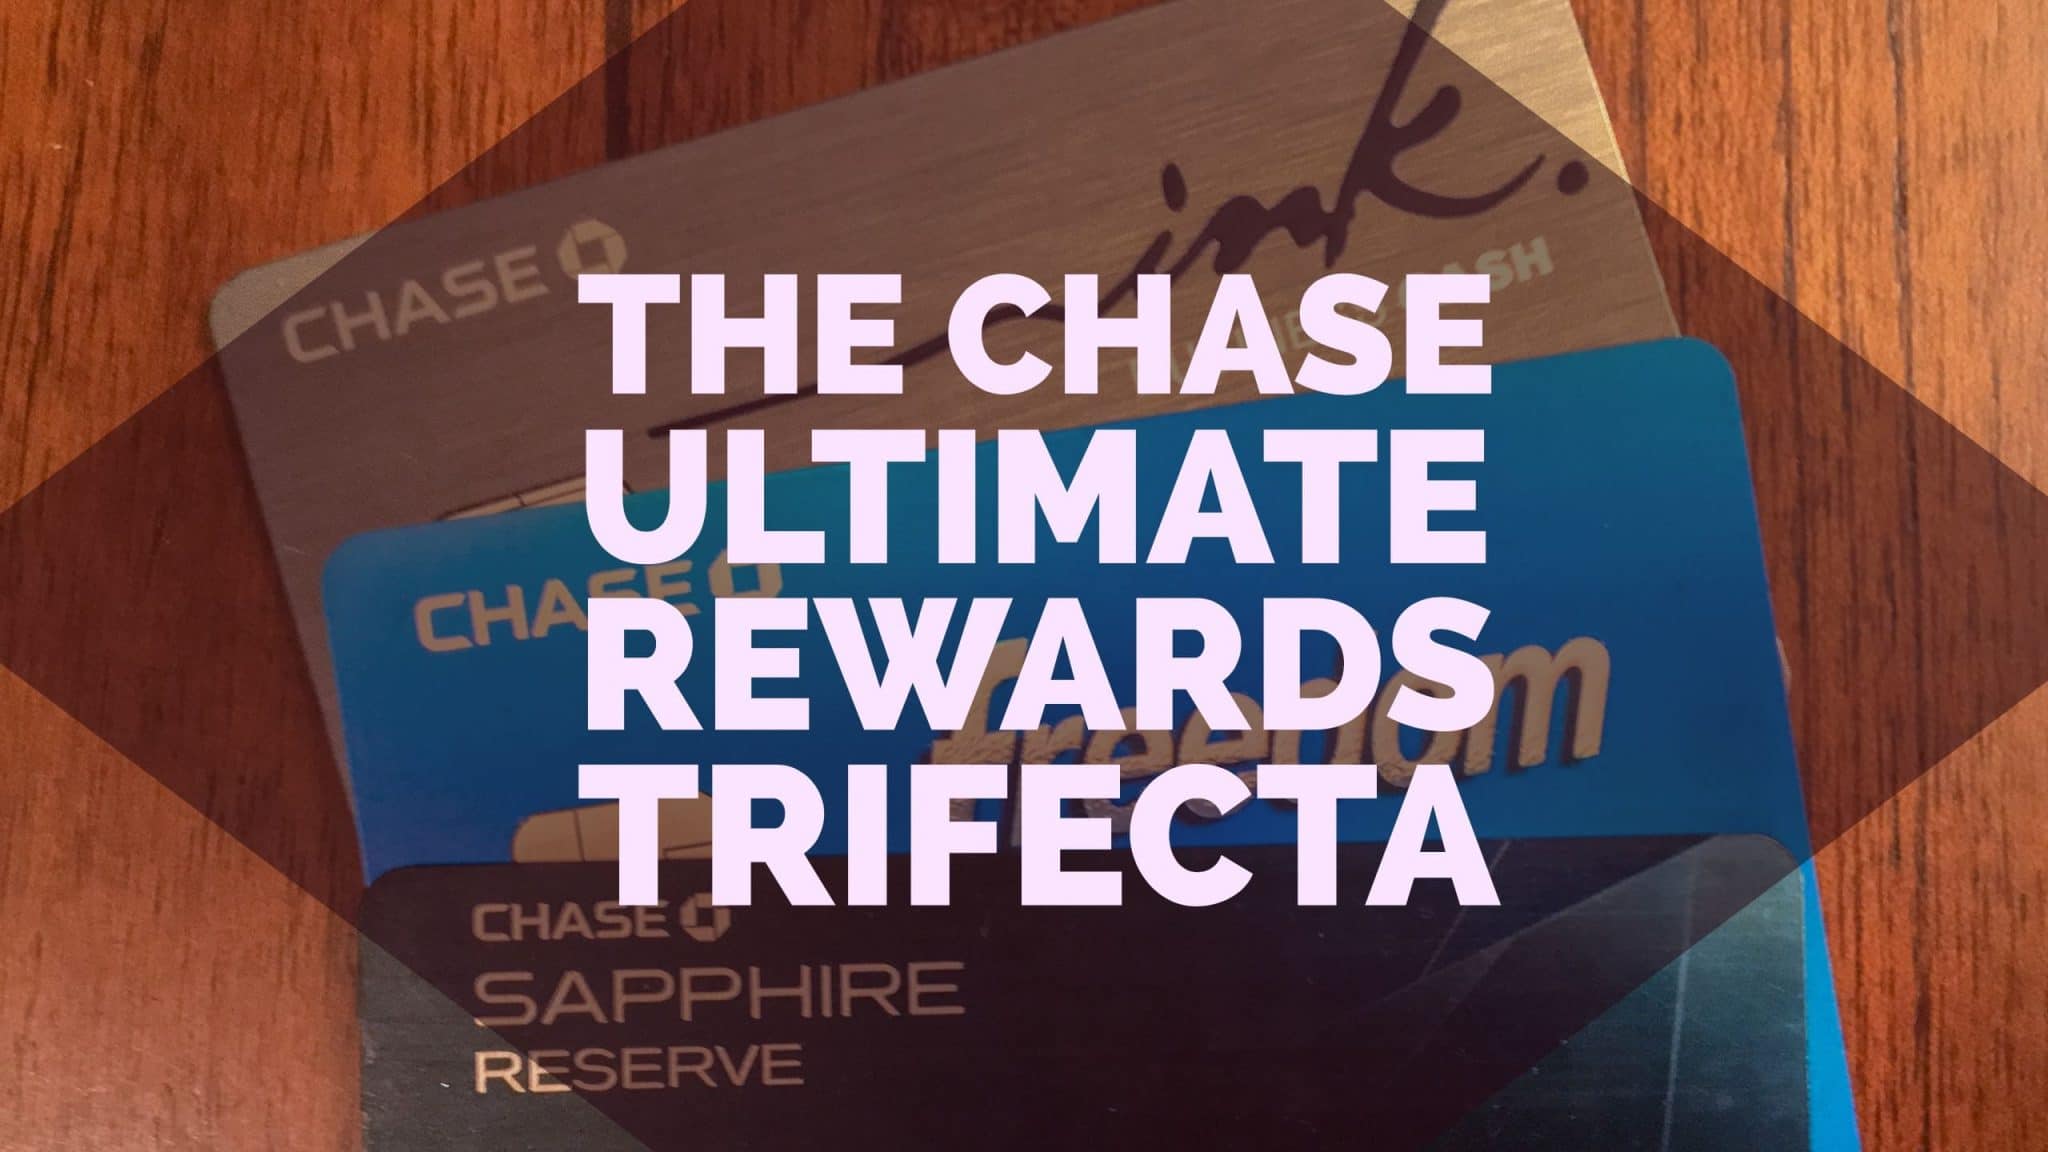 The Chase Ultimate Rewards Trifecta